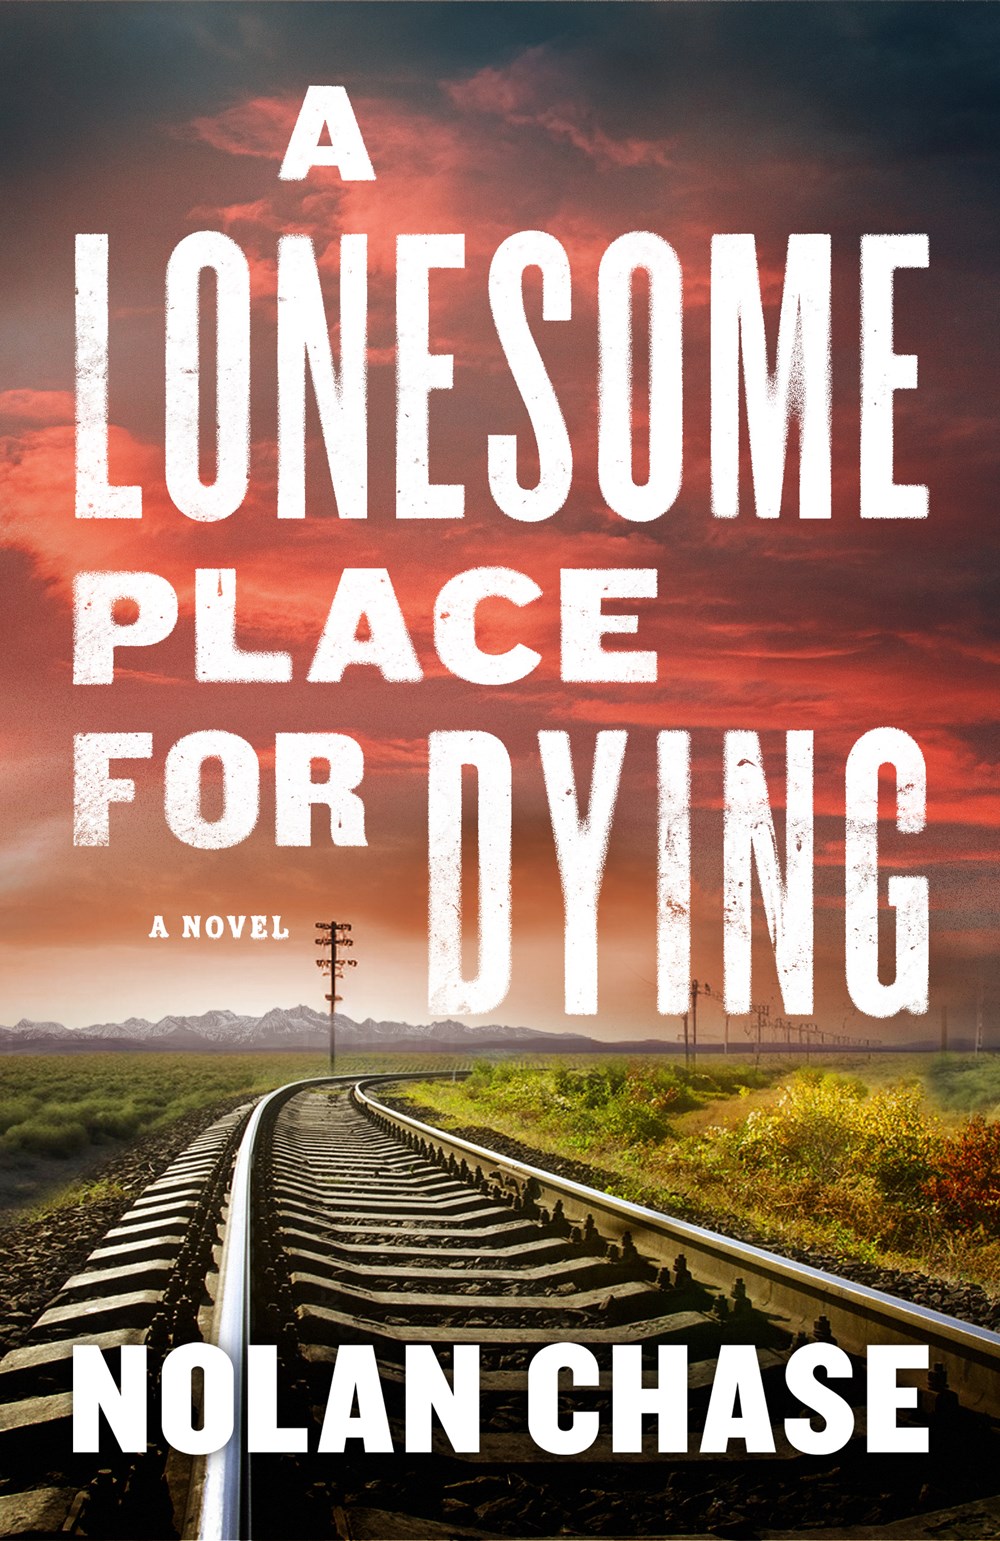 ‘A Lonesome Place for Dying’ by Nolan Chase | Mystery Pick of the Month